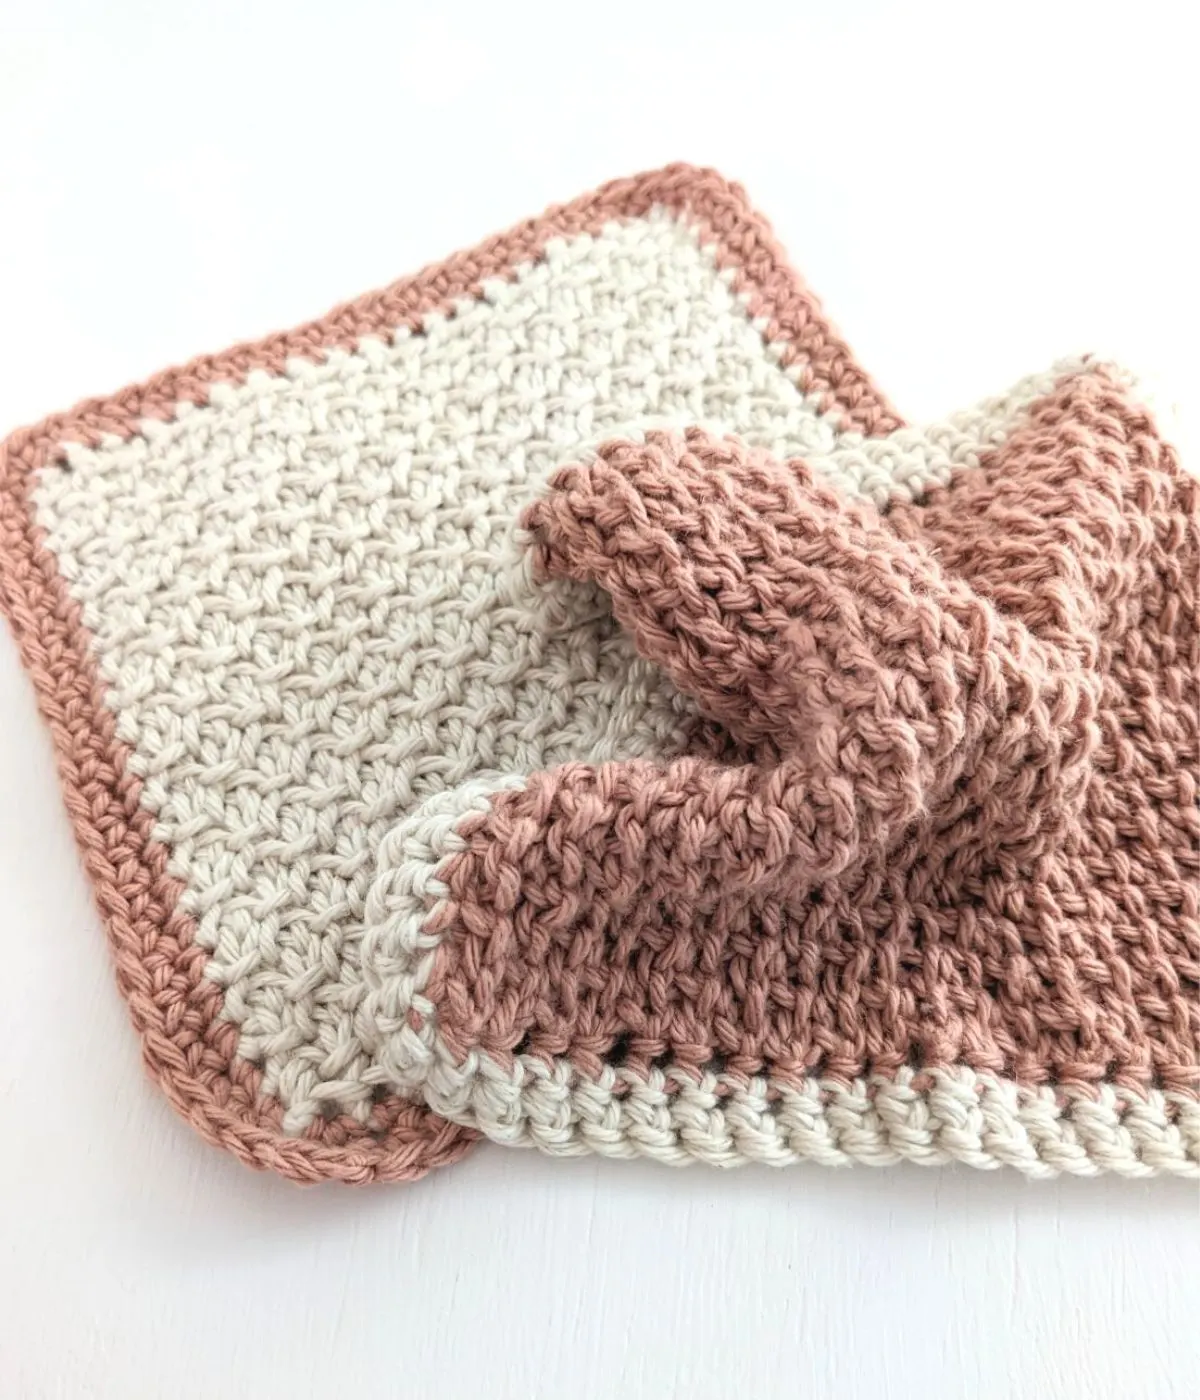 A Tunisian crochet wash cloth that is shown from the front + back side.